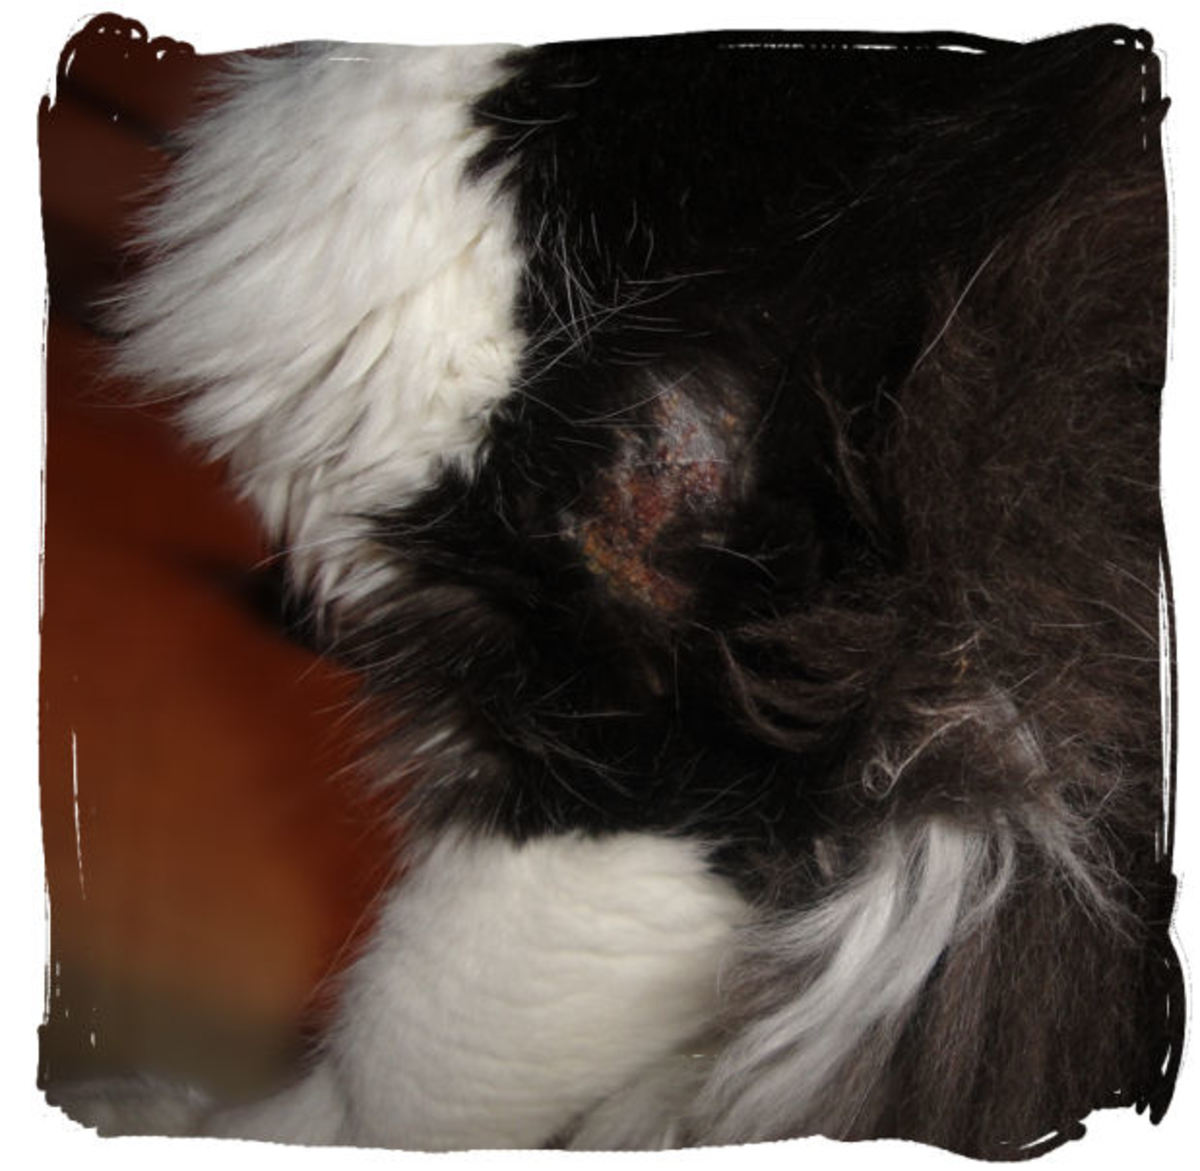 How to Get Rid of Hot Spots on Cats PetHelpful